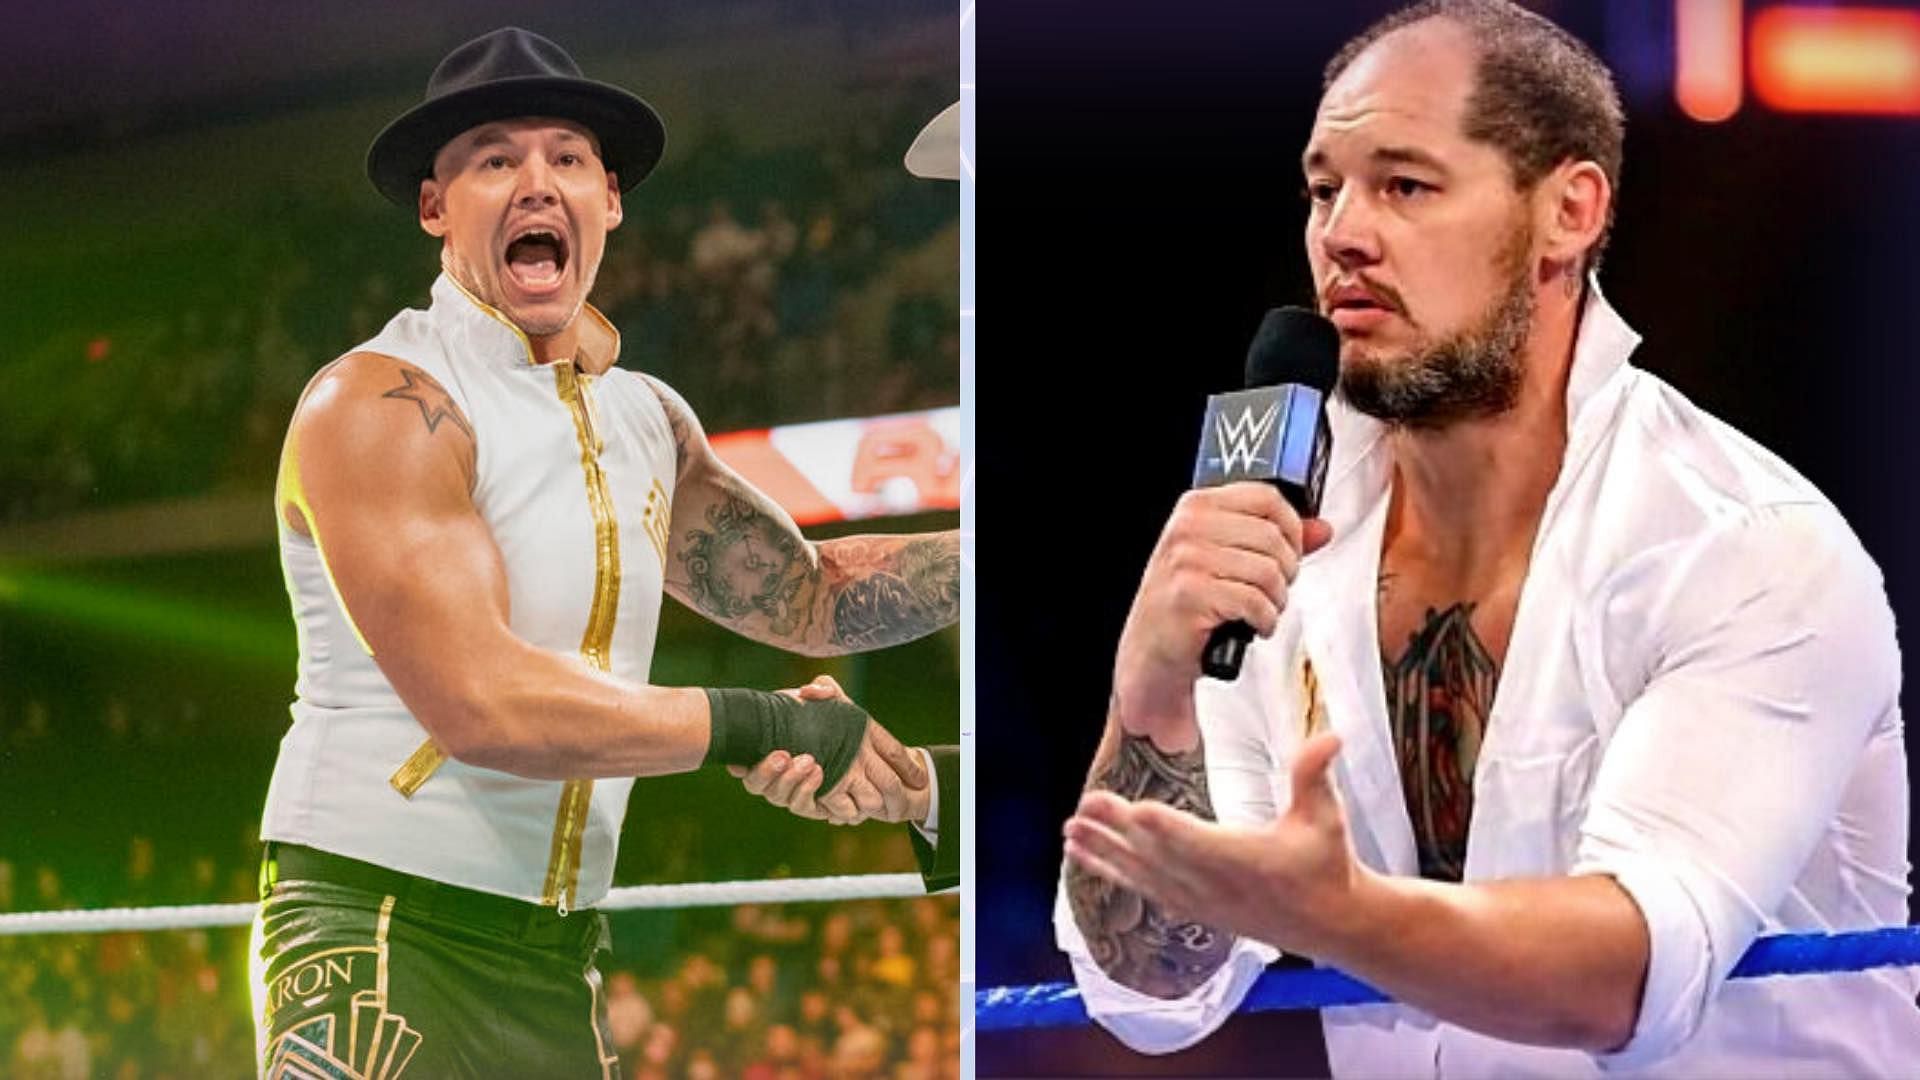 Baron Corbin picked up a shocking win at a recent WWE show